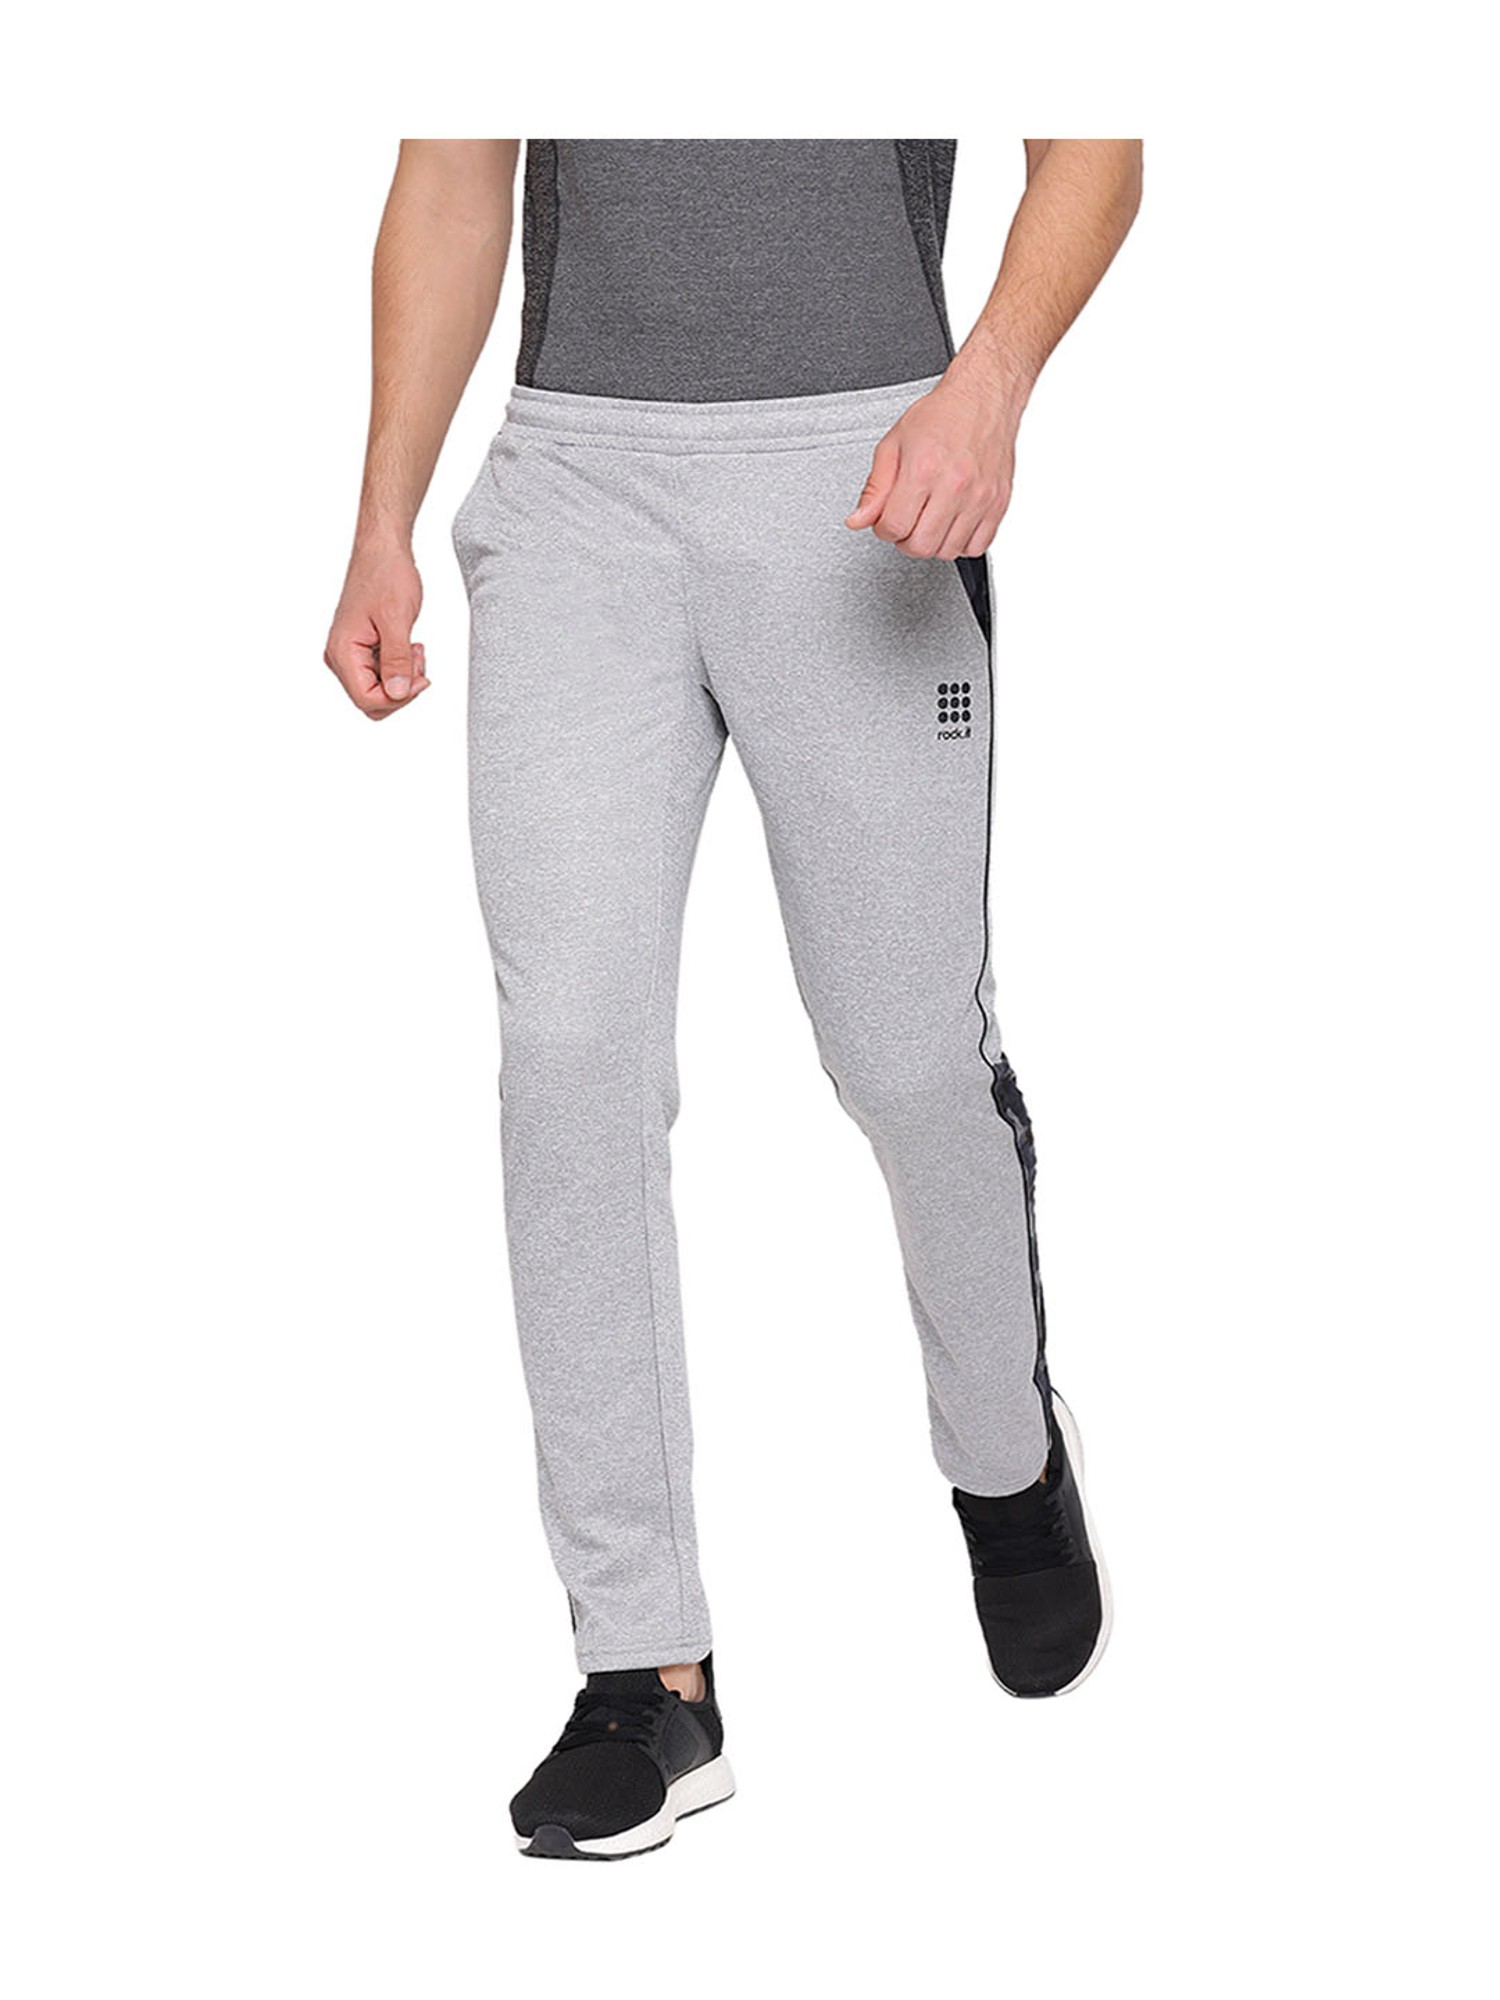 Buy ROCKIT Mens Trackpants Regular Track Pants 21901005711Navy BlueS   Lowest price in India GlowRoad